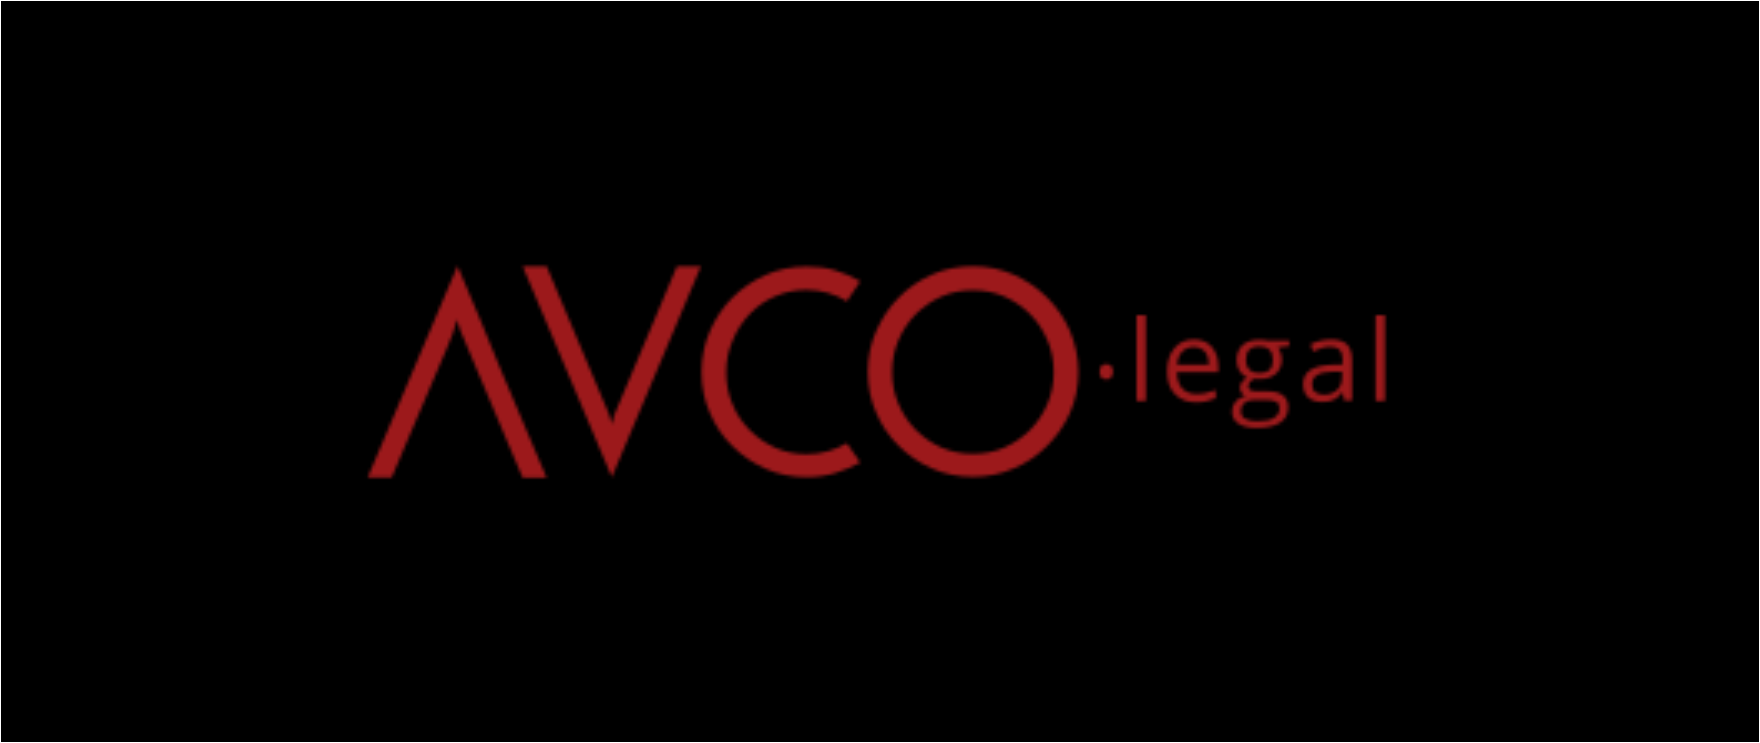 avco.png